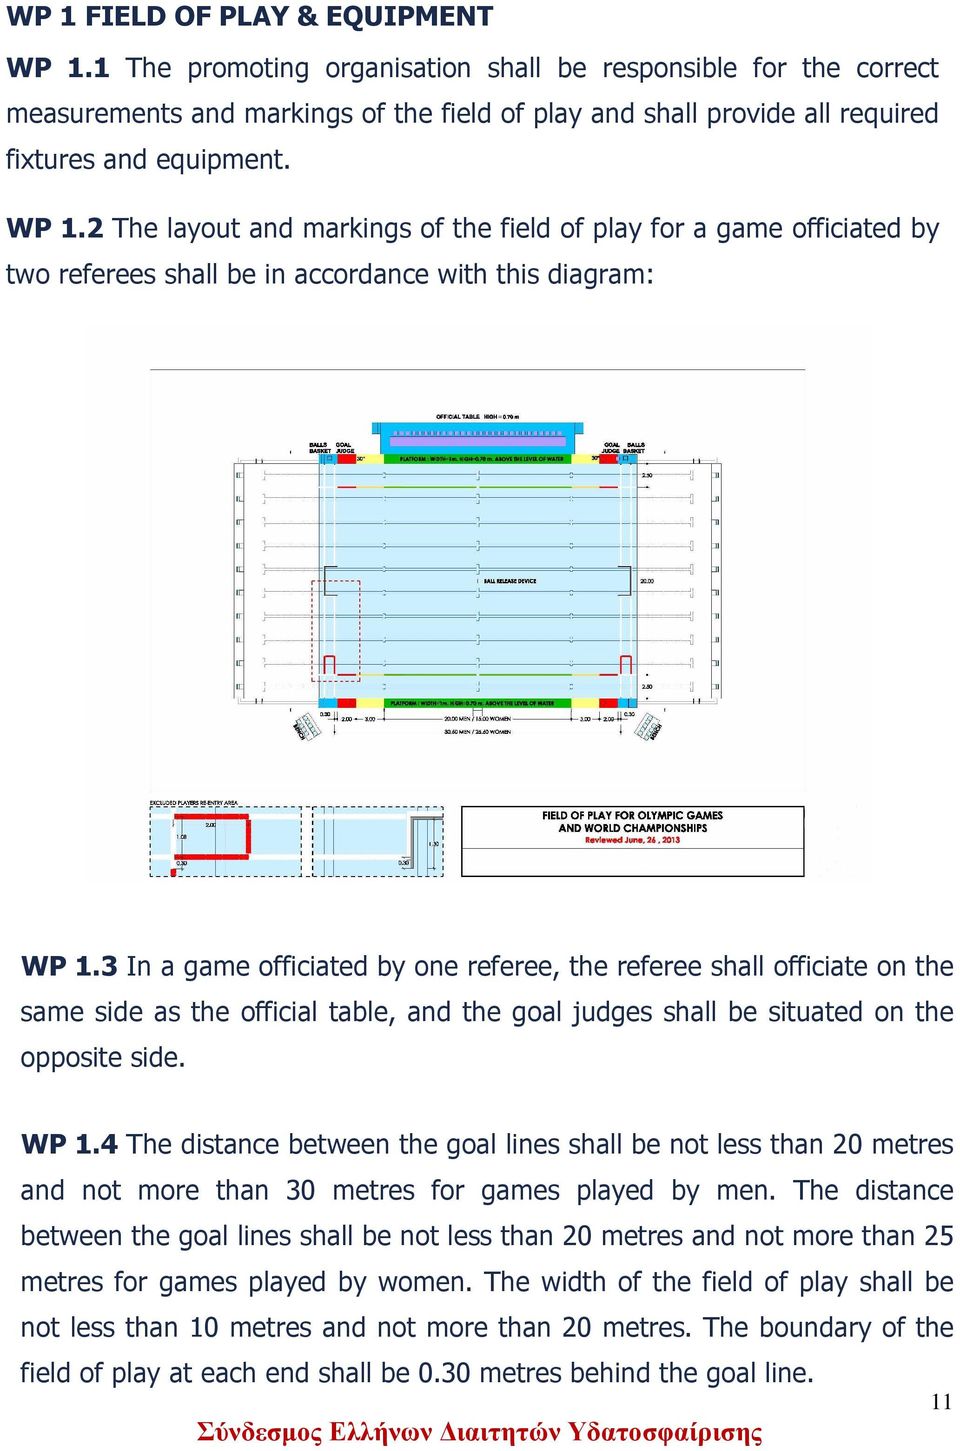 2 The layout and markings of the field of play for a game officiated by two referees shall be in accordance with this diagram: WP 1.